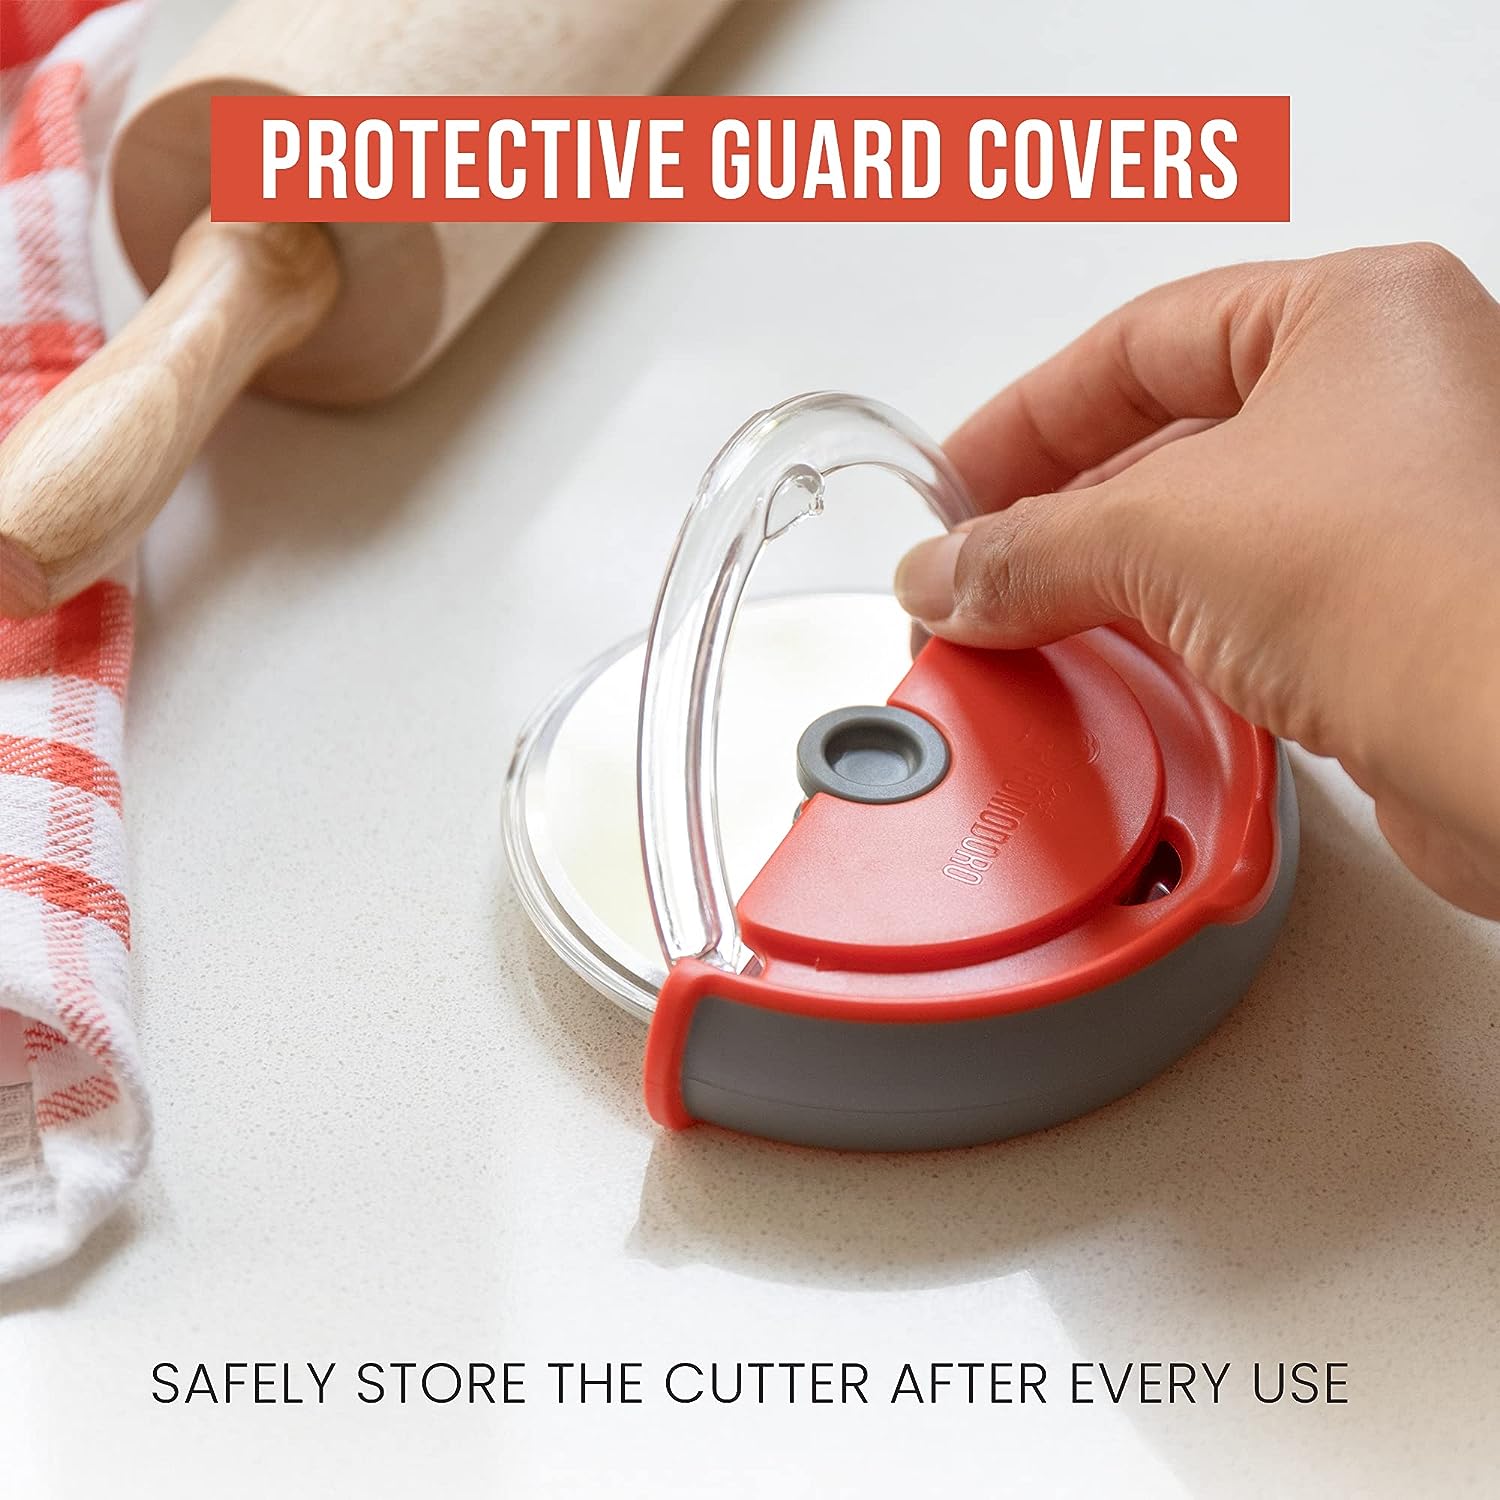 Pizza Cutter Wheel with Protective Cover Blade Guard (Orange)